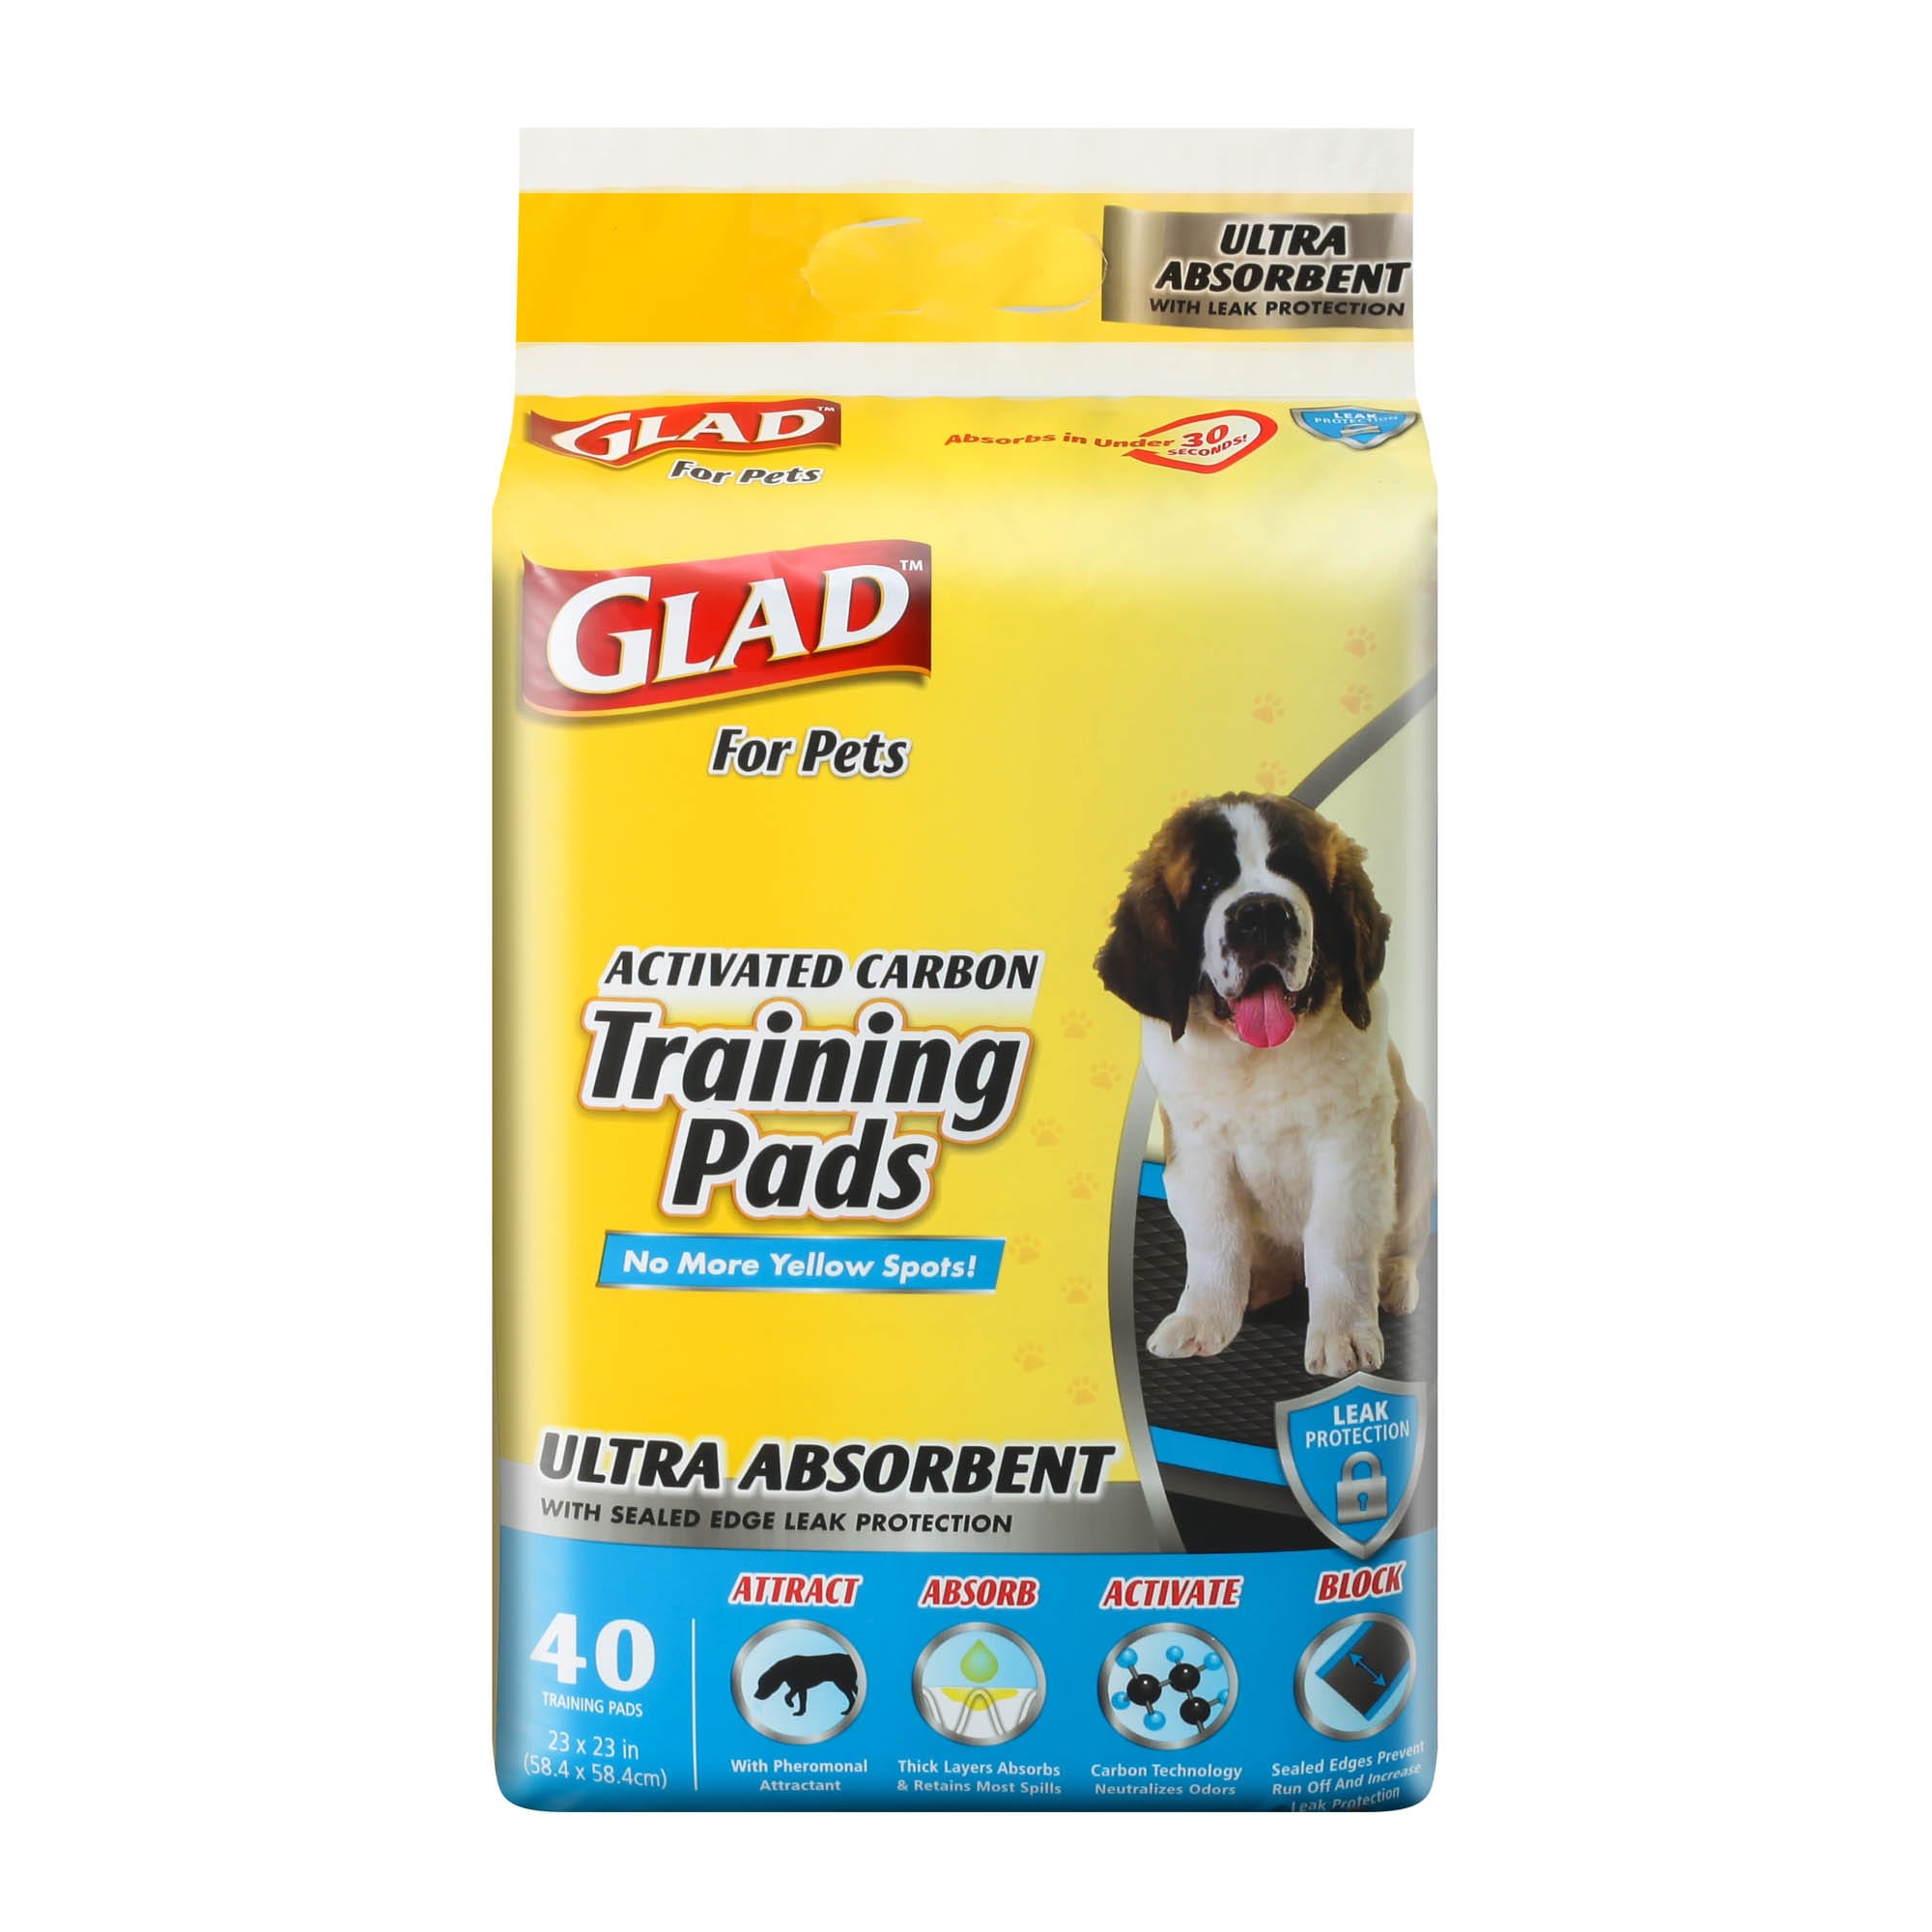 Glad for Pets Heavy Duty Ultra-Absorbent Activated Charcoal Puppy Pads with Leak-Proof edges  Pee Pads for Dogs Perfect for Training New Puppies